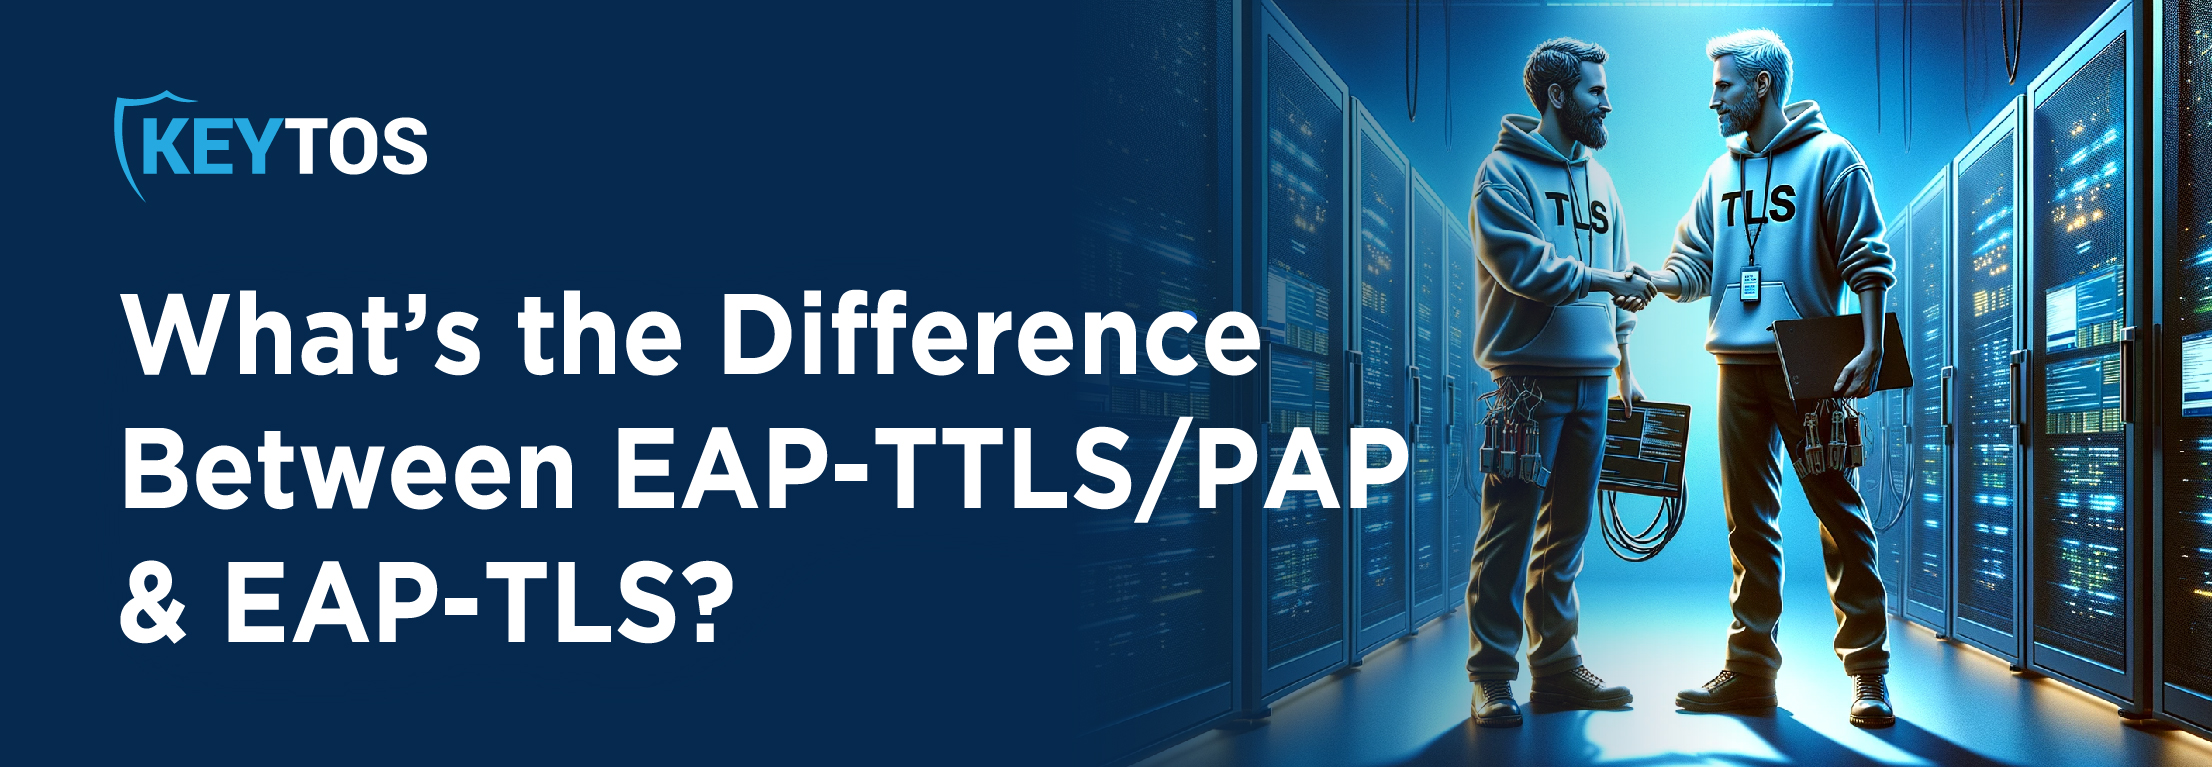 What is Extensible Authentication Protocol (EAP)? EAP-TLS vs. EAP-TTLS/PAP are they the same?